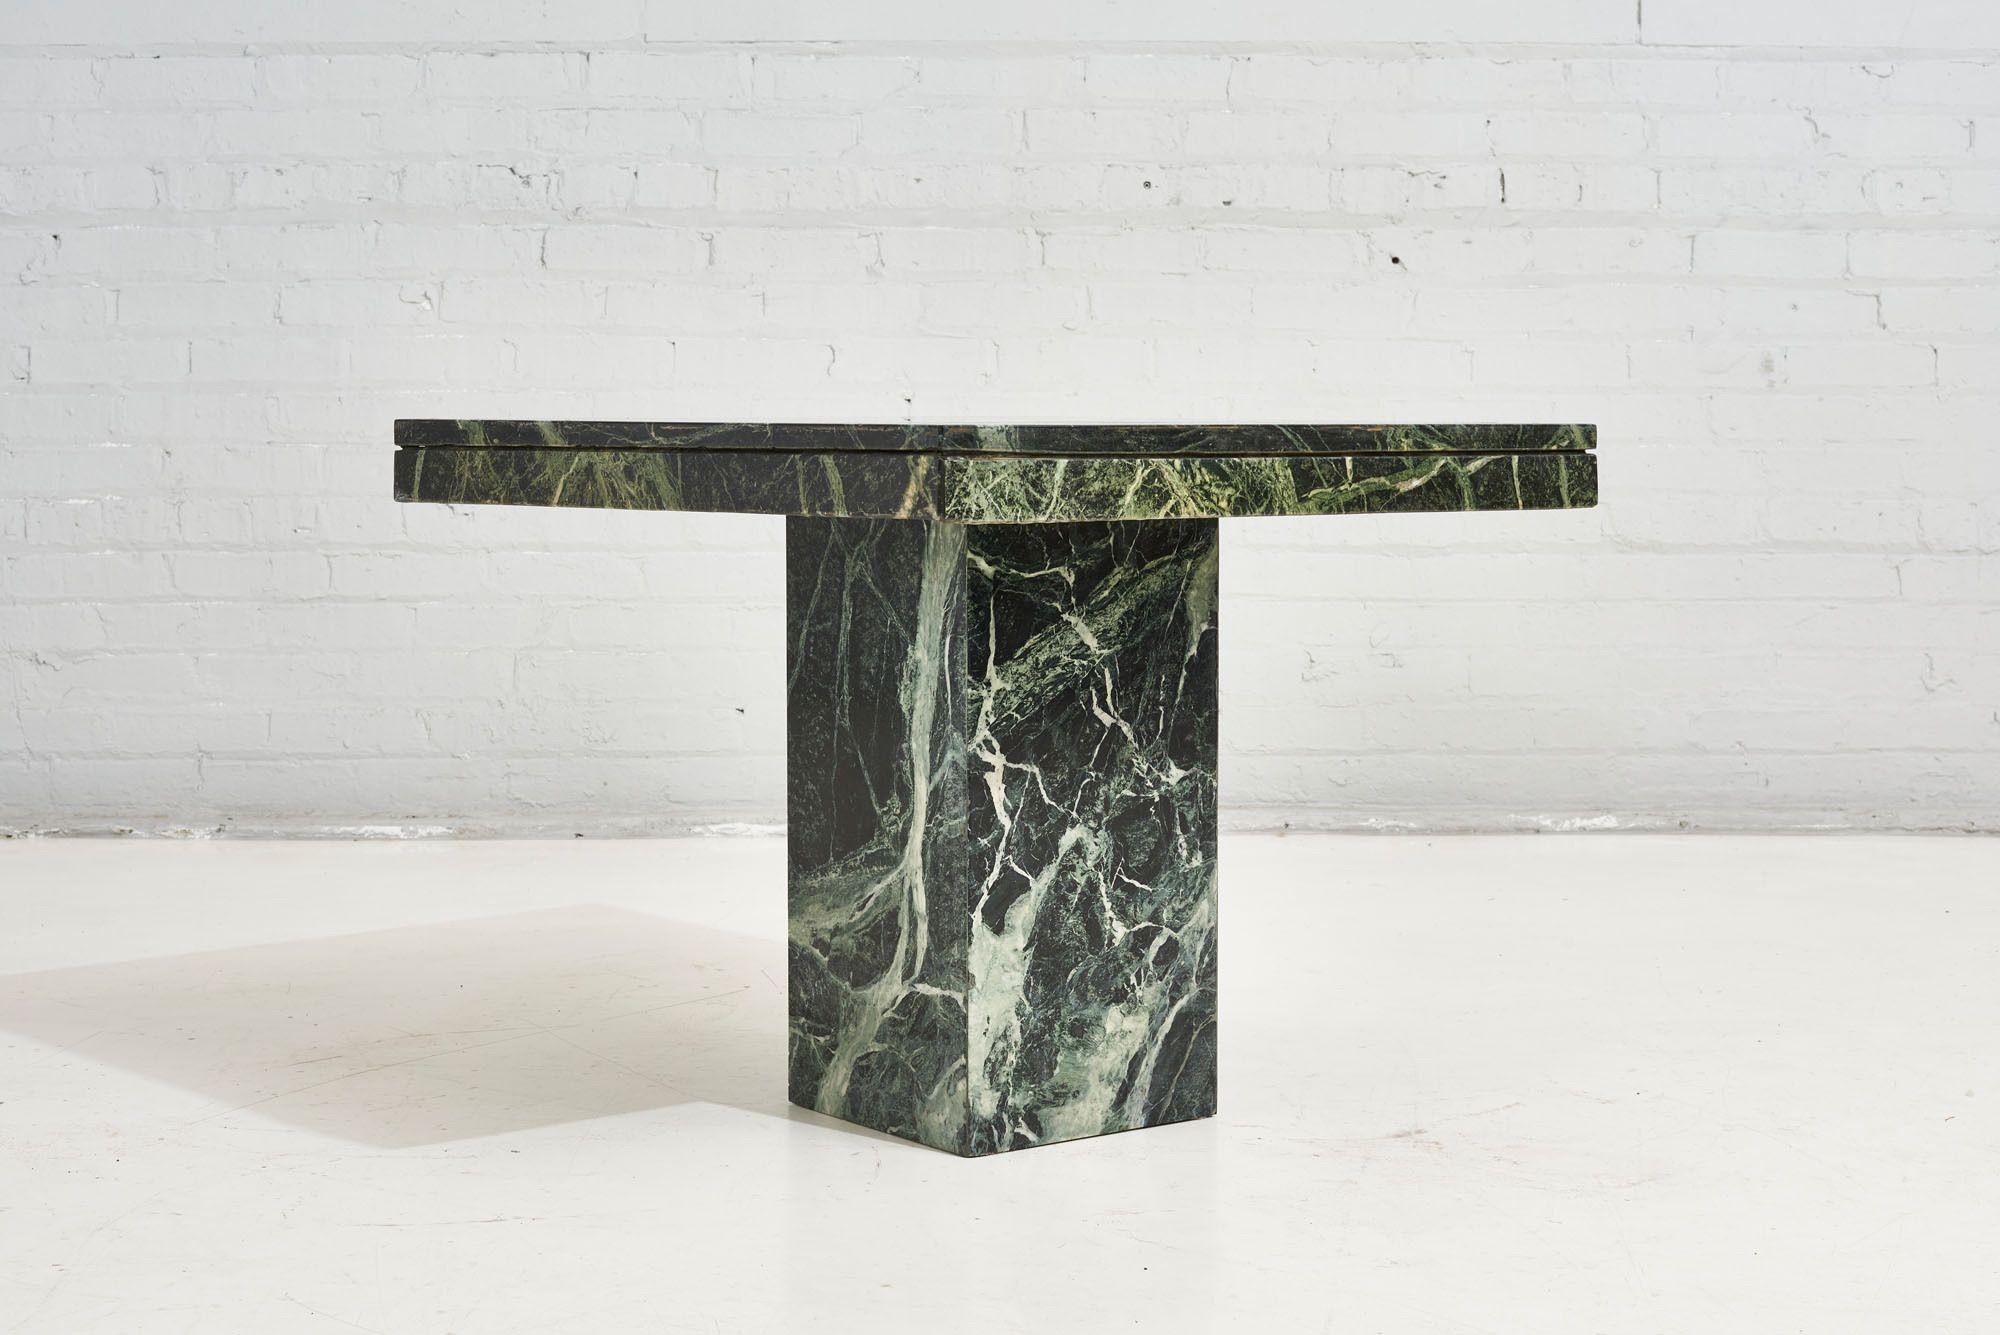 green marble end table